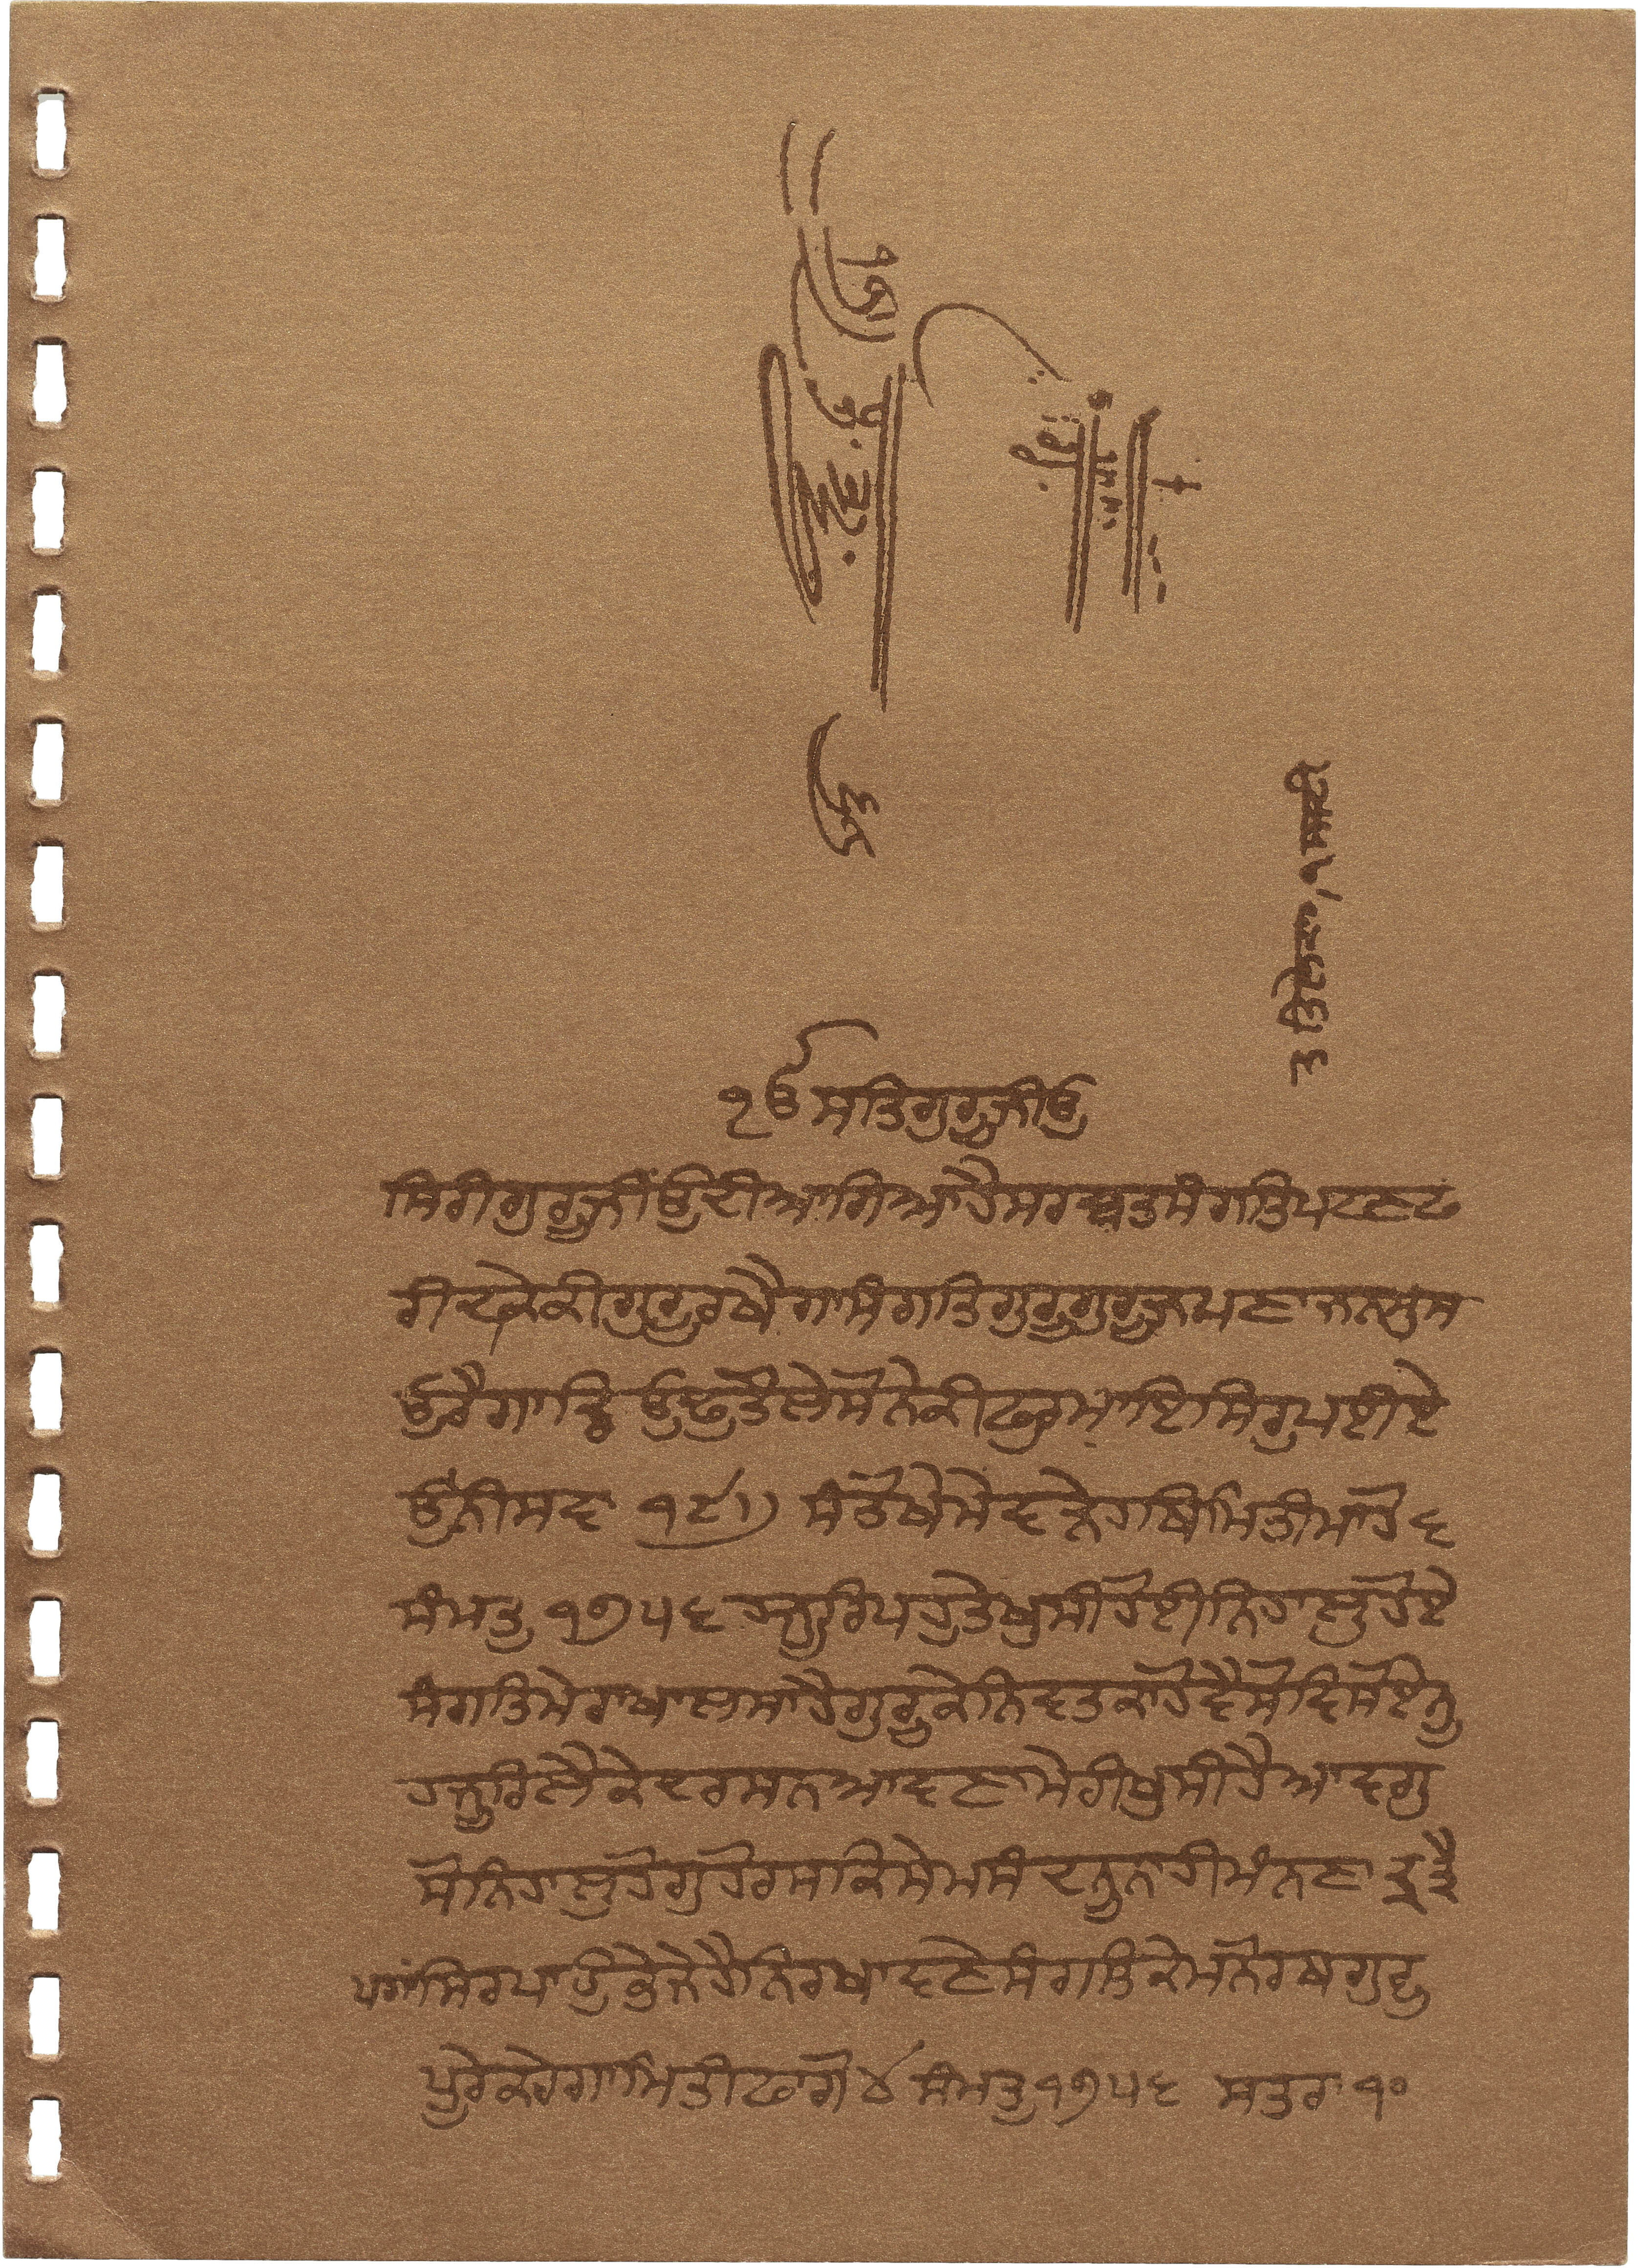 Gurumukhi, the script used in north-western India. A page from a well-known text.